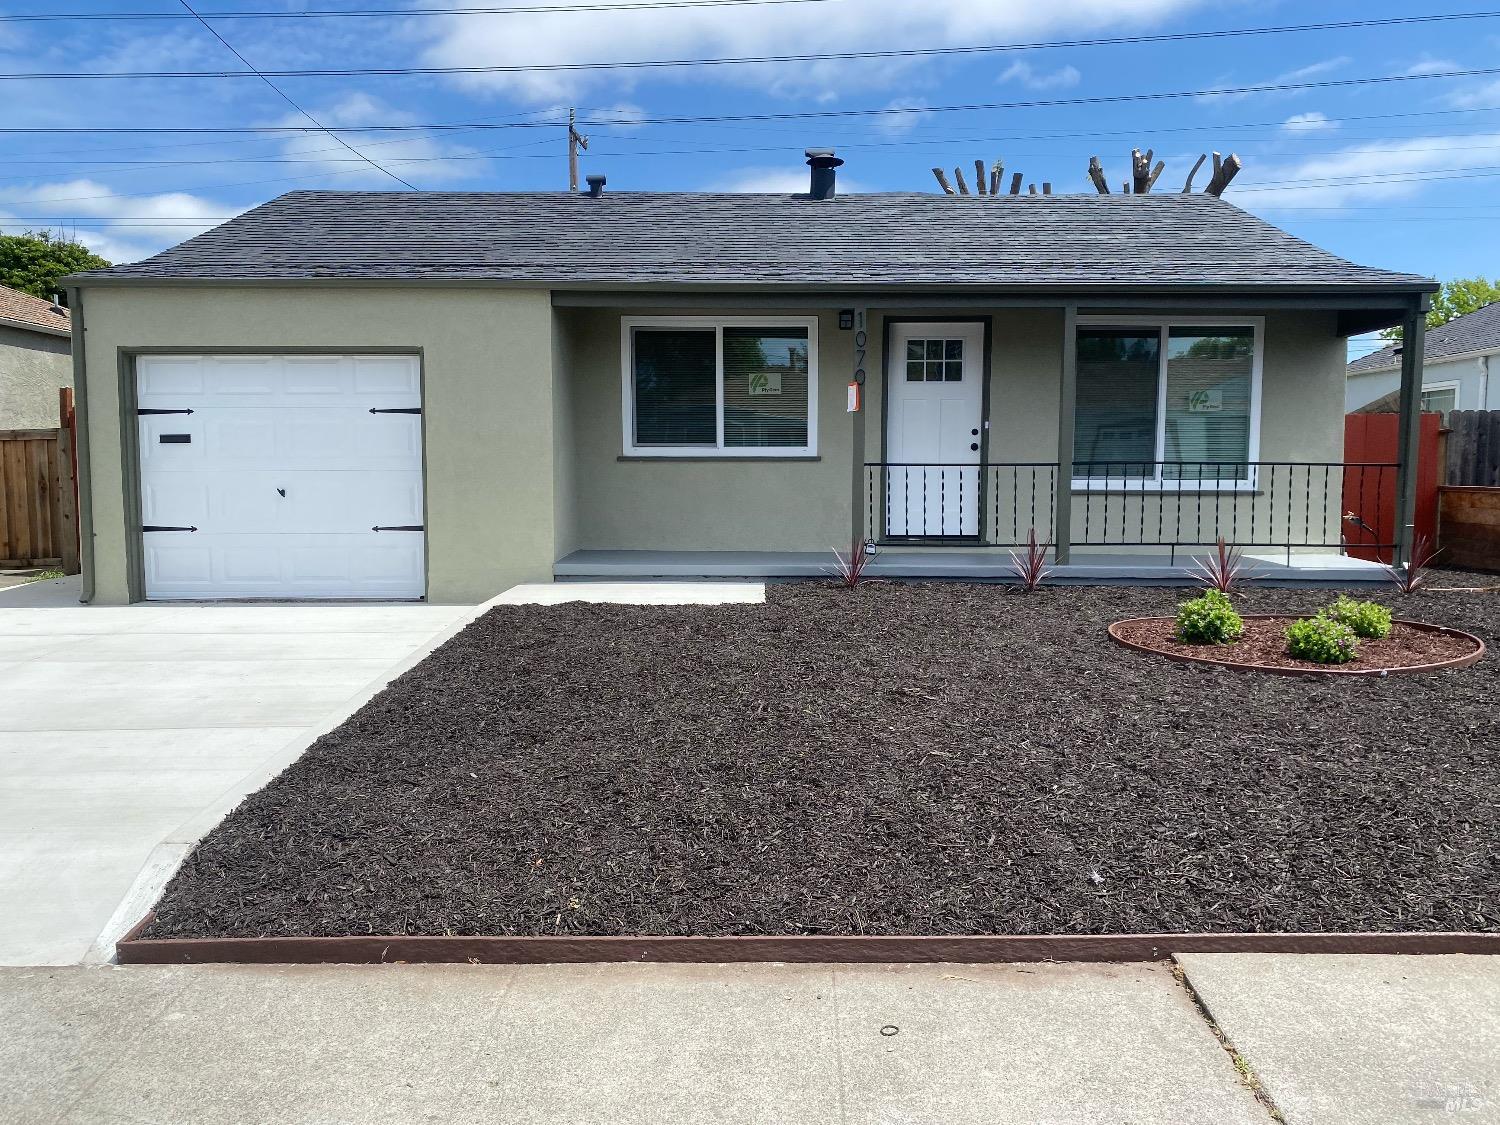 Photo of 1070 Thelma Ave in Vallejo, CA